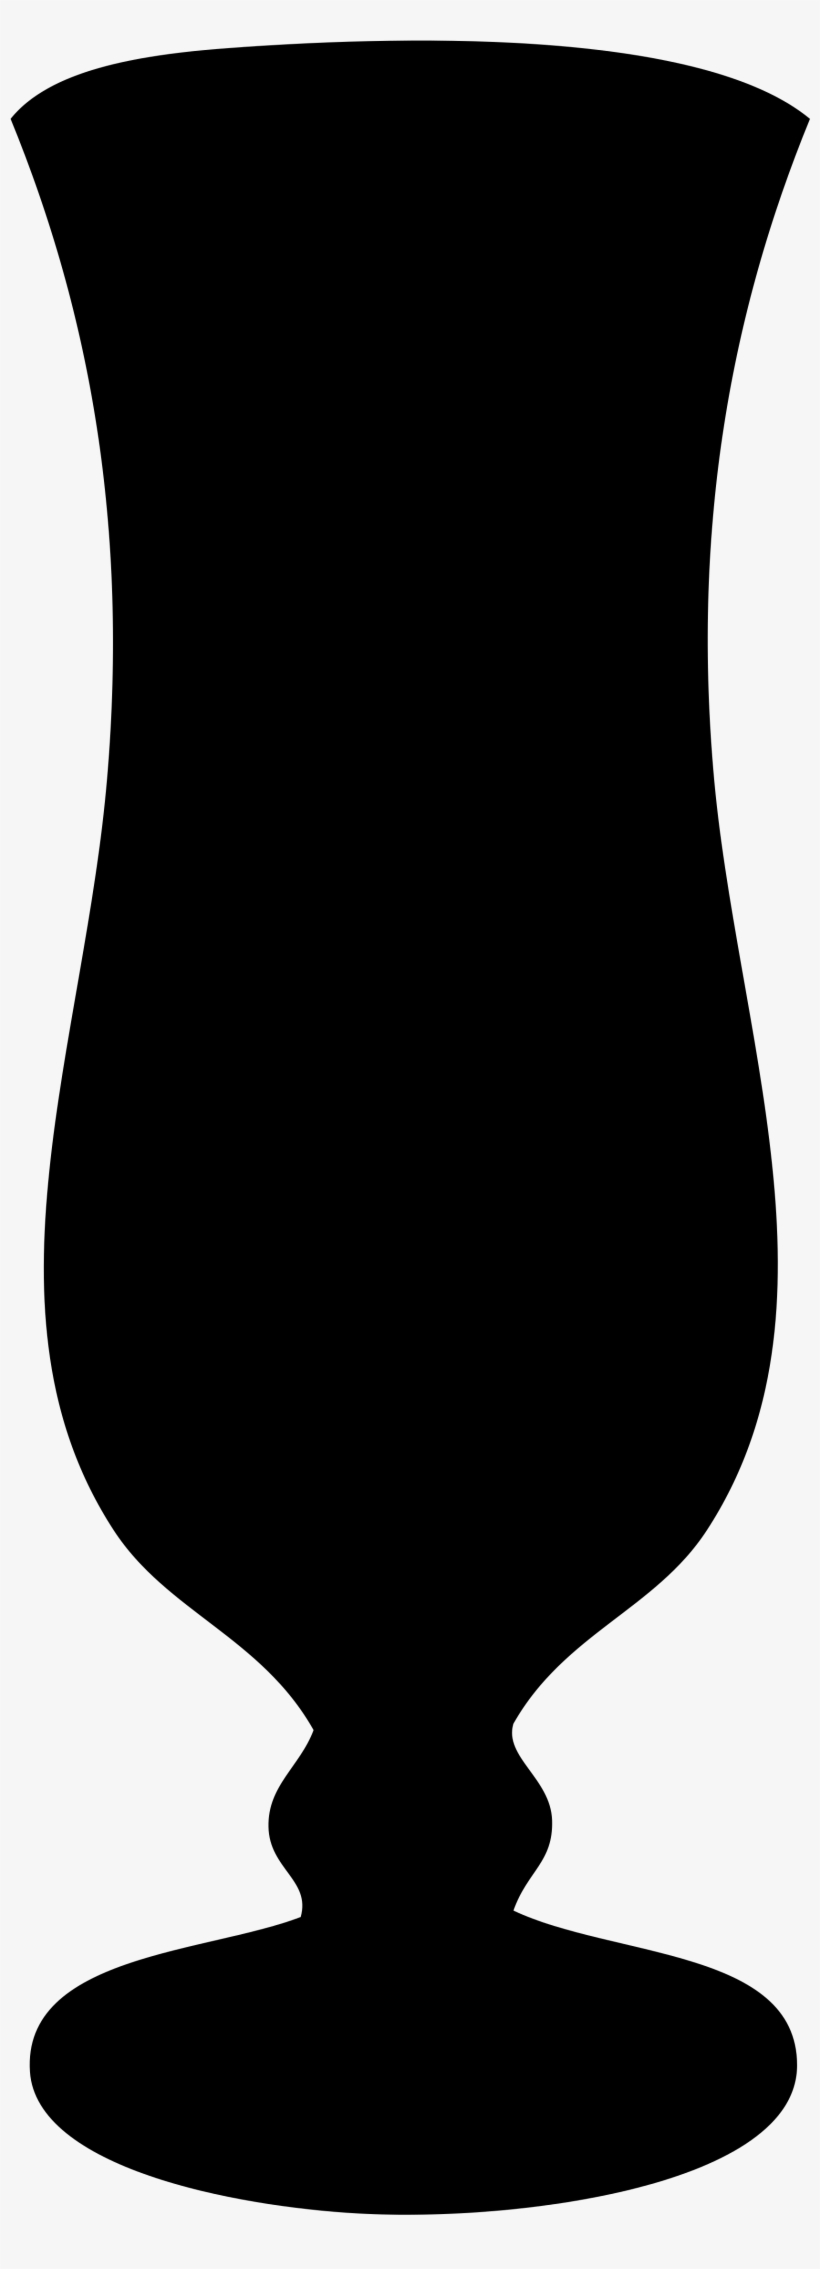 Glass Silhouette At Getdrawings - Hurricane Glass Silhouette, transparent png #72329